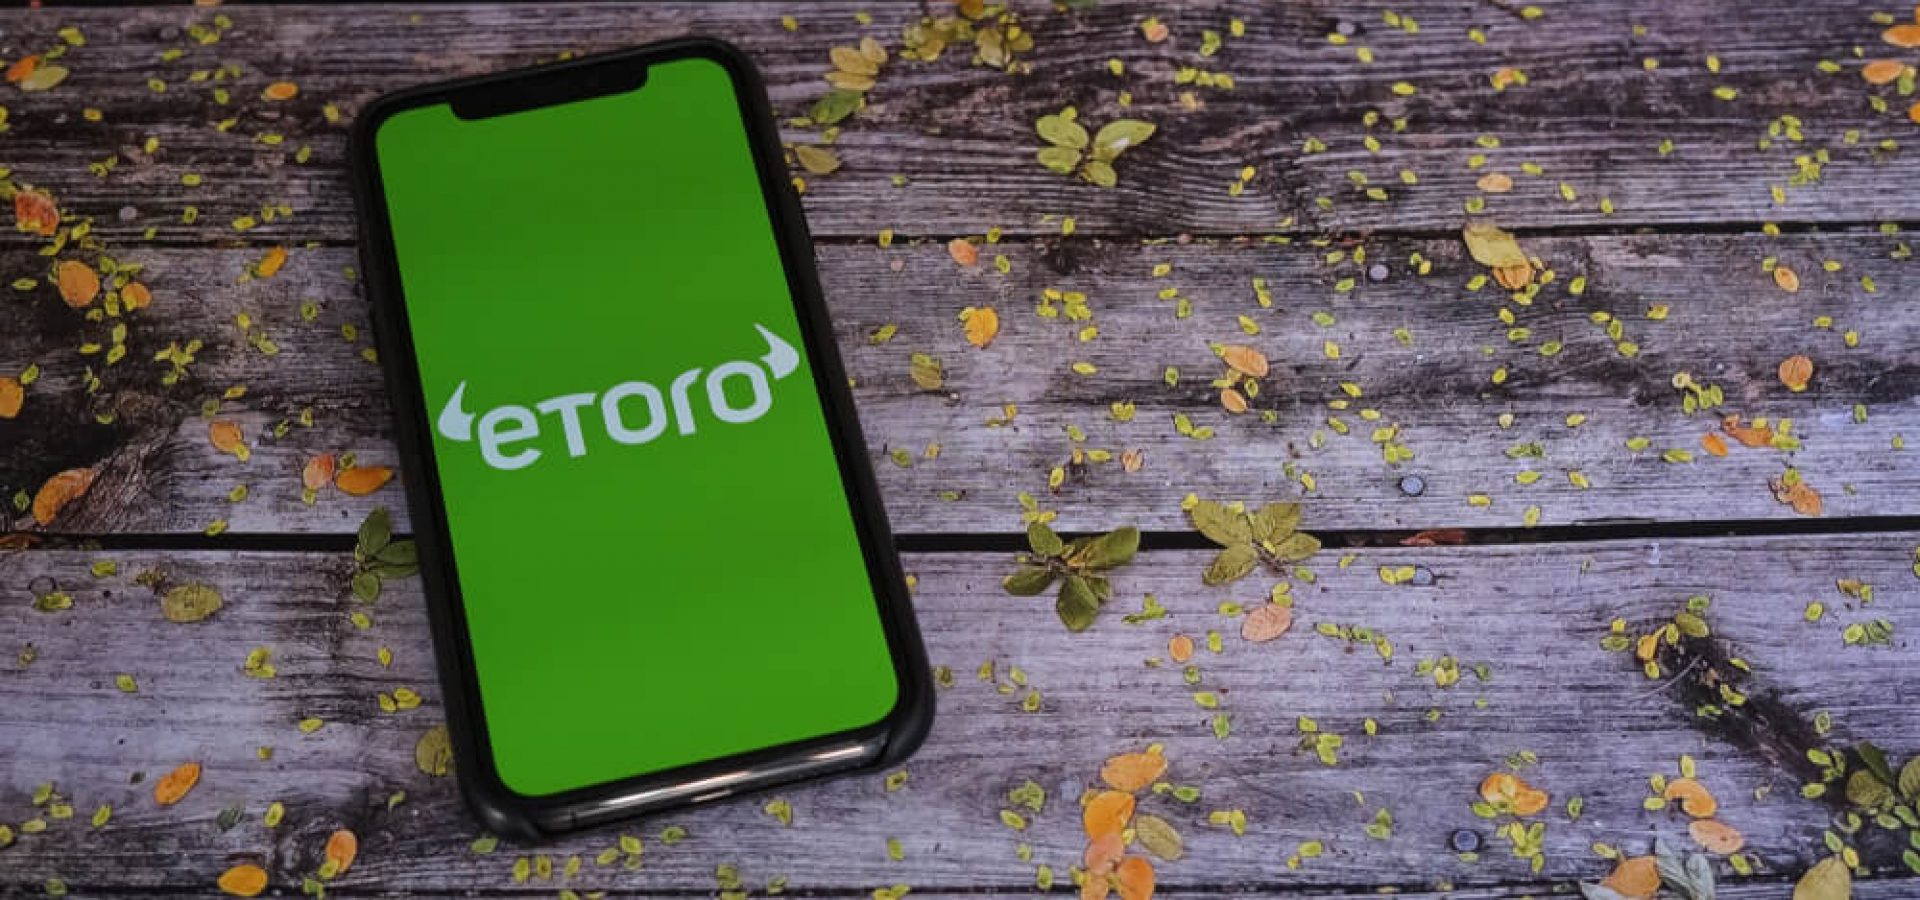 Etoro on a smartphone screen on an old wooden table with leaves on it.